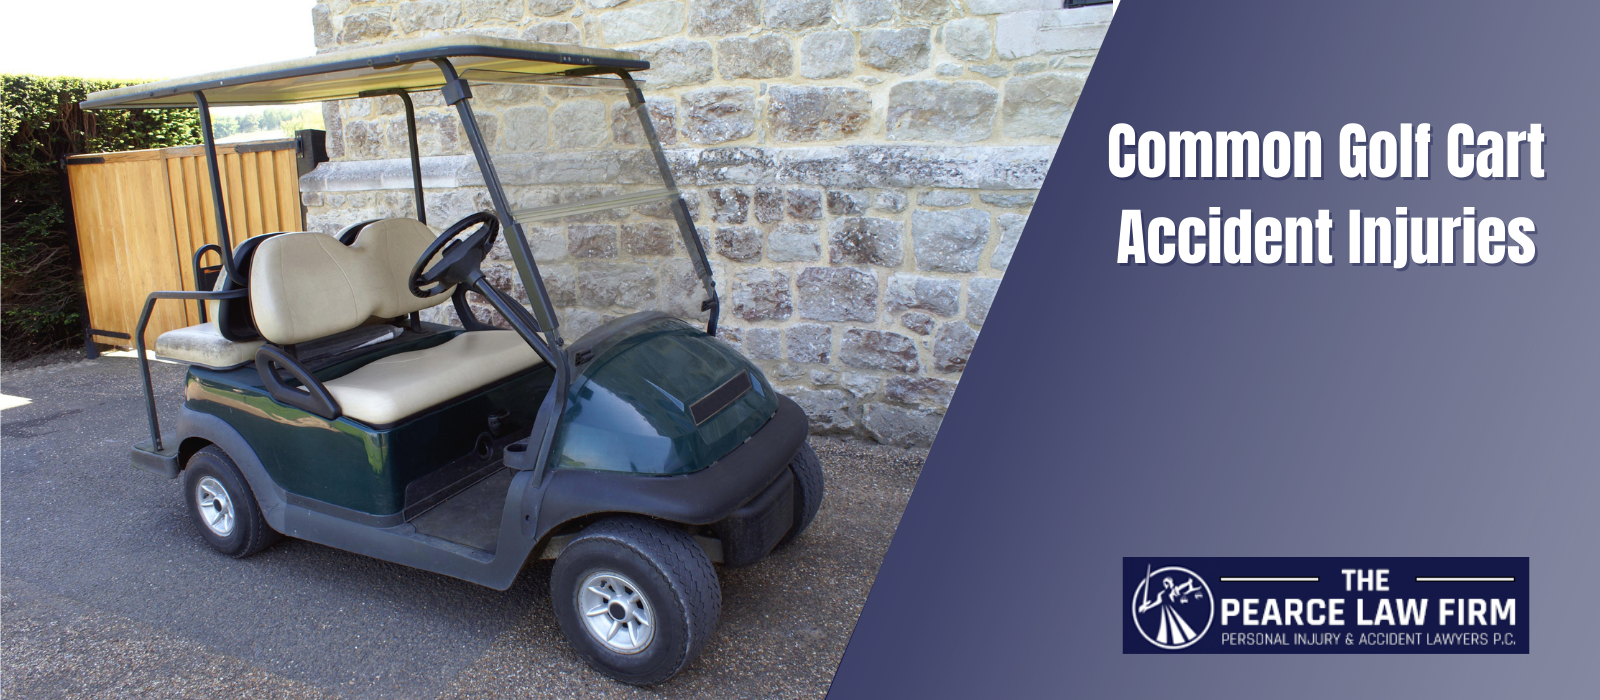 Pearce Law Firm Golf Cart Accident Lawyer Pennsylvania